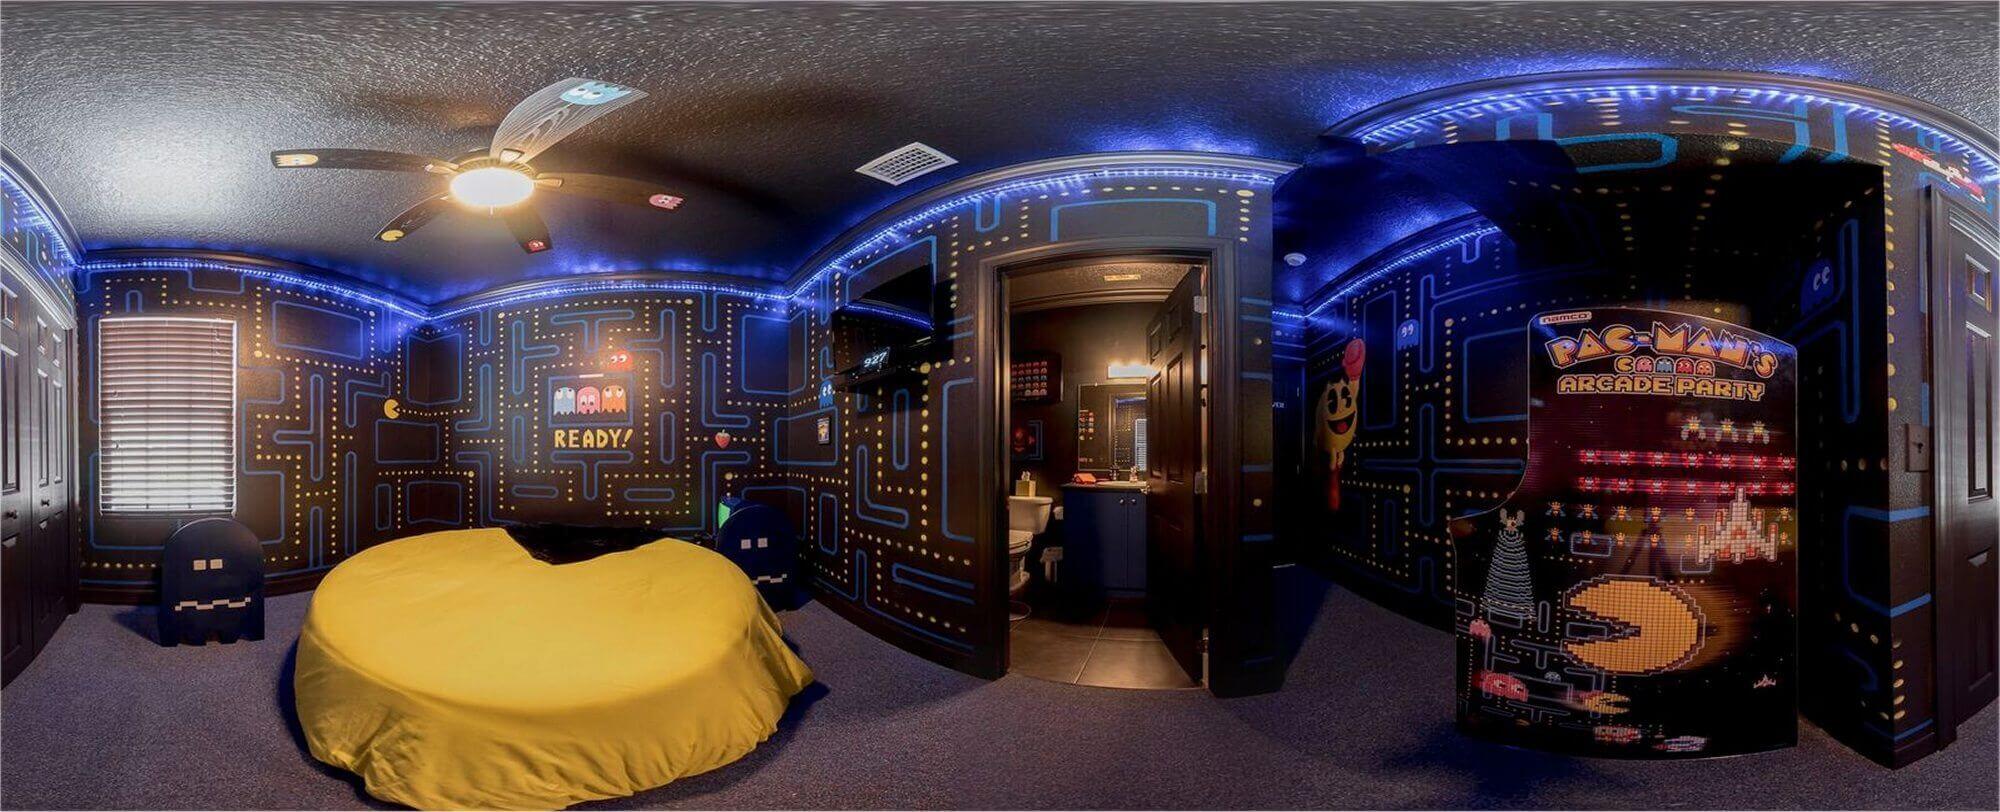 A vacation rental home for family reunions near Orlando, FL - The 1980s Video Game Bedroom - Sleep in a Pac-Man maze at The Great Escape Lakeside - Managed by Orlando Area Luxury Resorts & Rentals